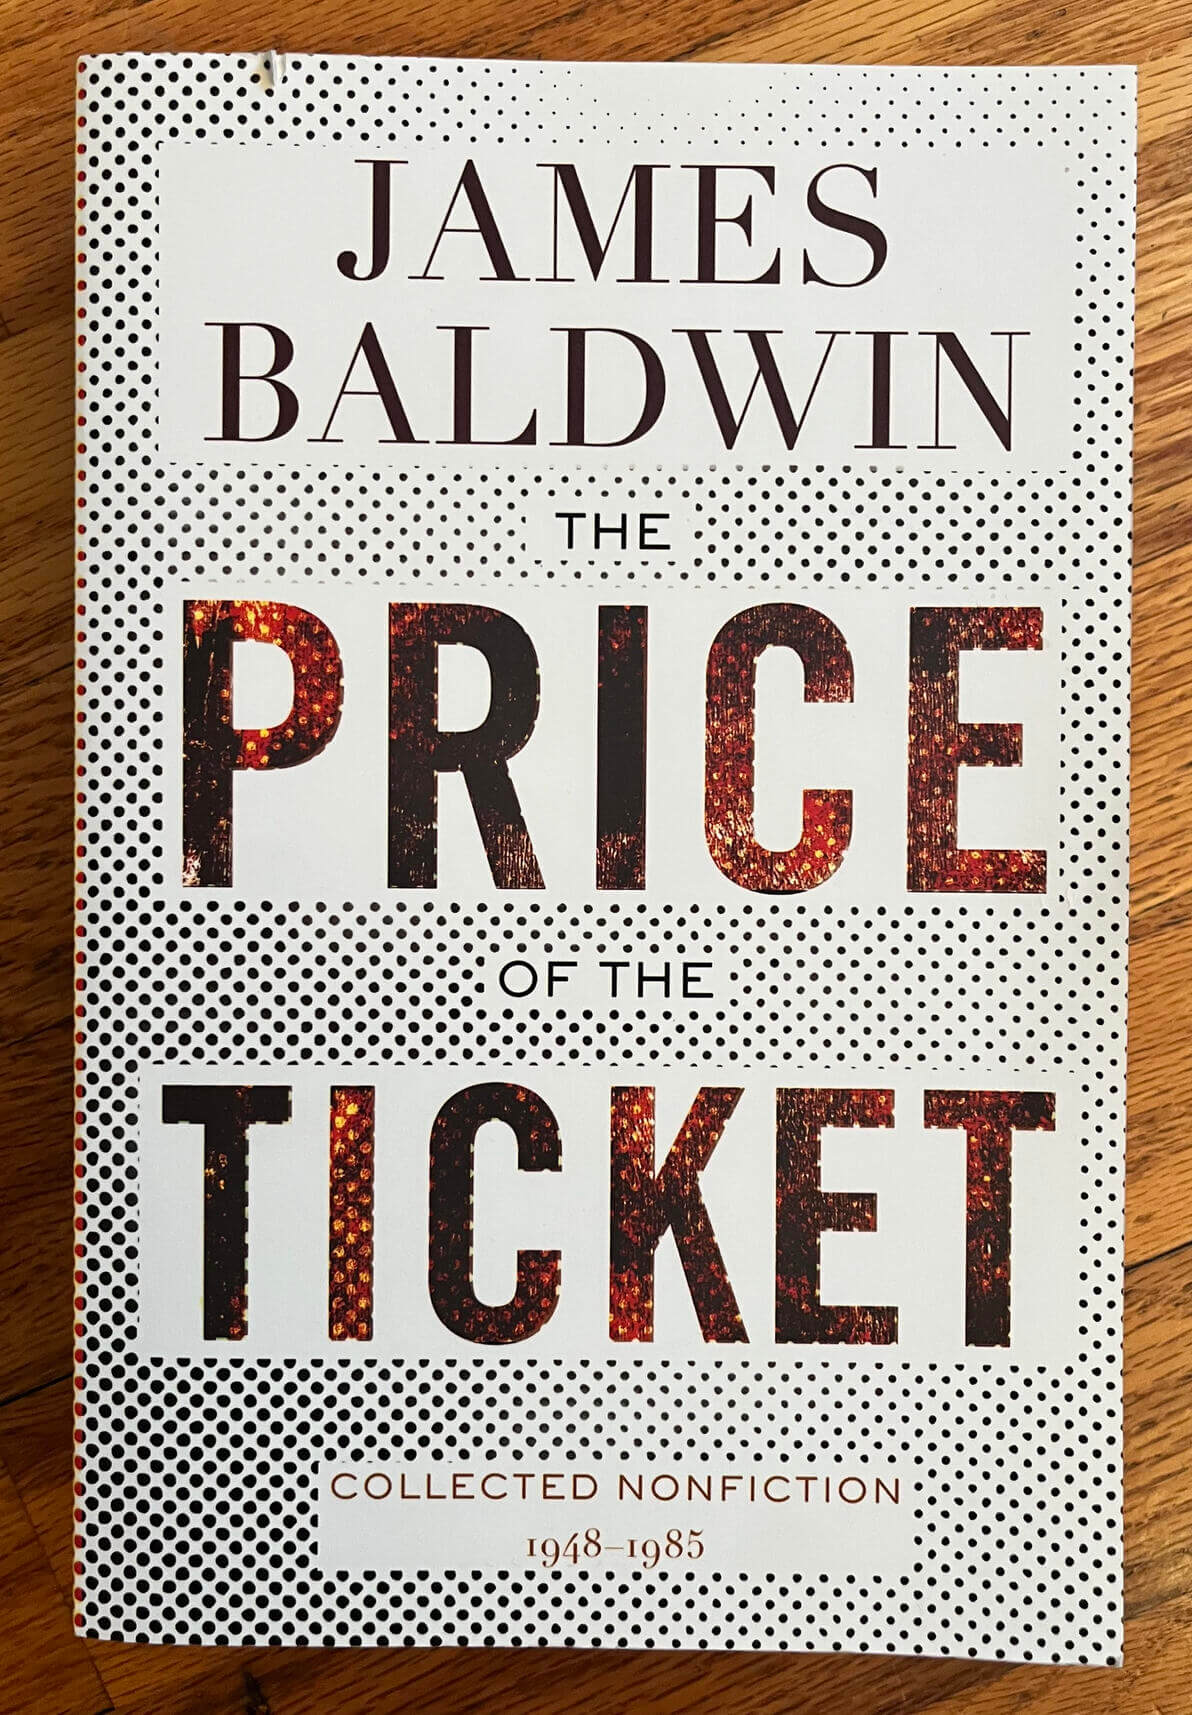 “The Price of The Ticket” by James Baldwin